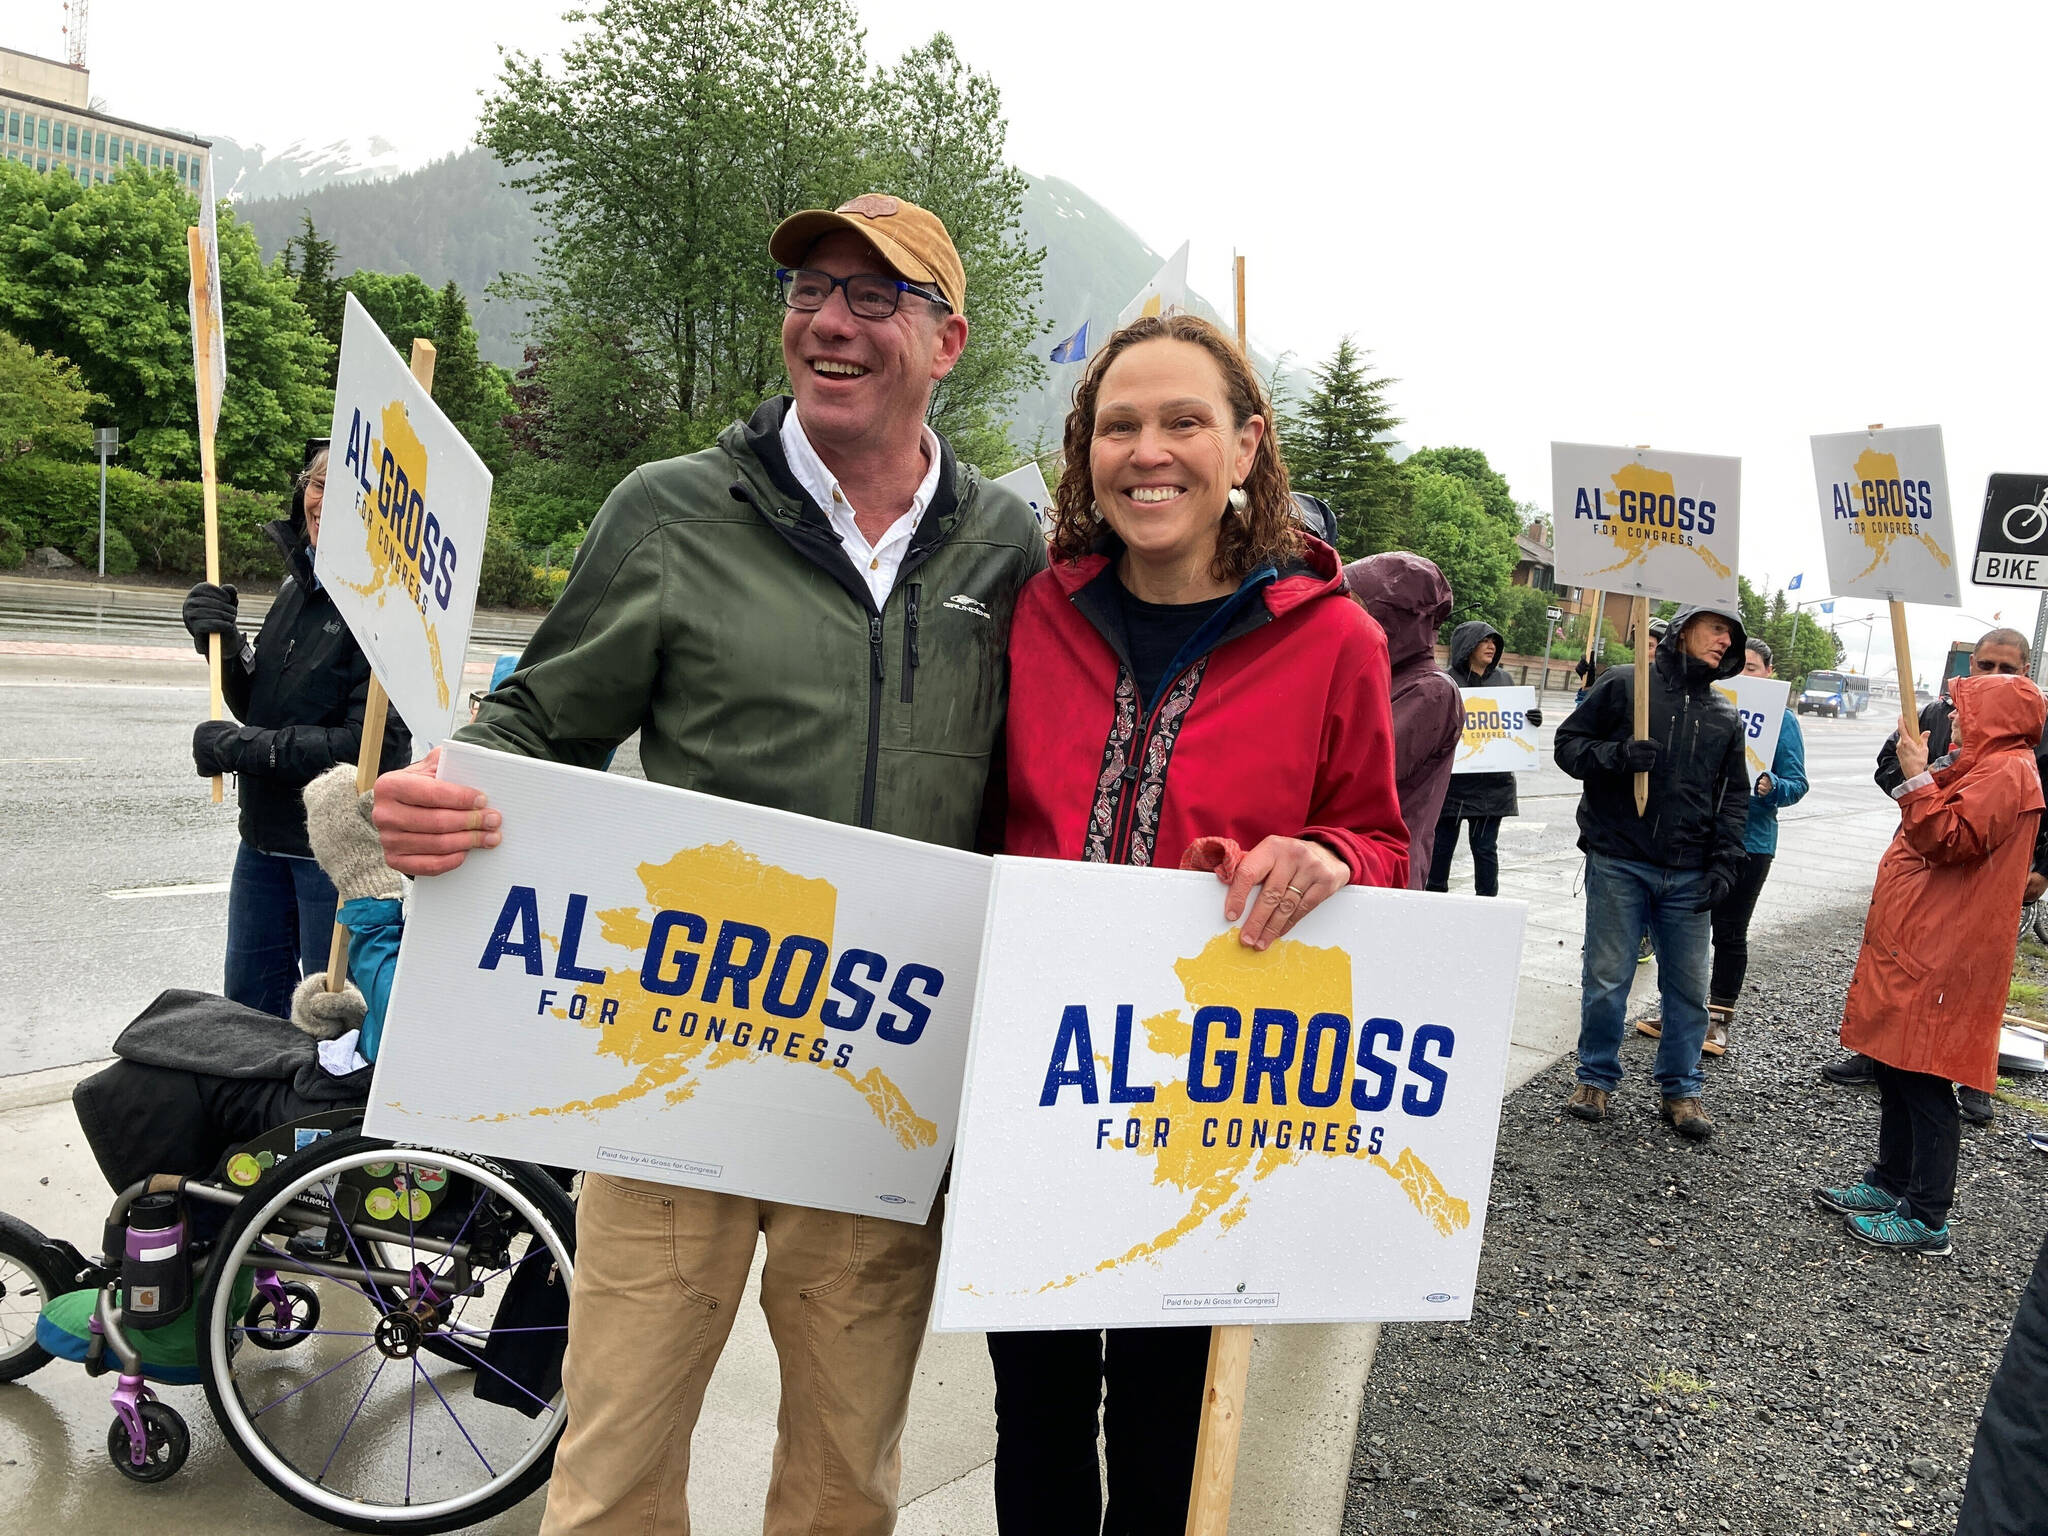 Al Gross, left, an independent running for Alaska’s U.S. House seat, poses beside his wife, Monica Gross, on Saturday, June 11, 2022, in Juneau, Alaska. Gross is one of 48 candidates in Saturday’s special primary for the House seat left vacant following the death in March of U.S. Rep. Don Young, who’d held the seat for 49 years. (AP Photo/Becky Bohrer)